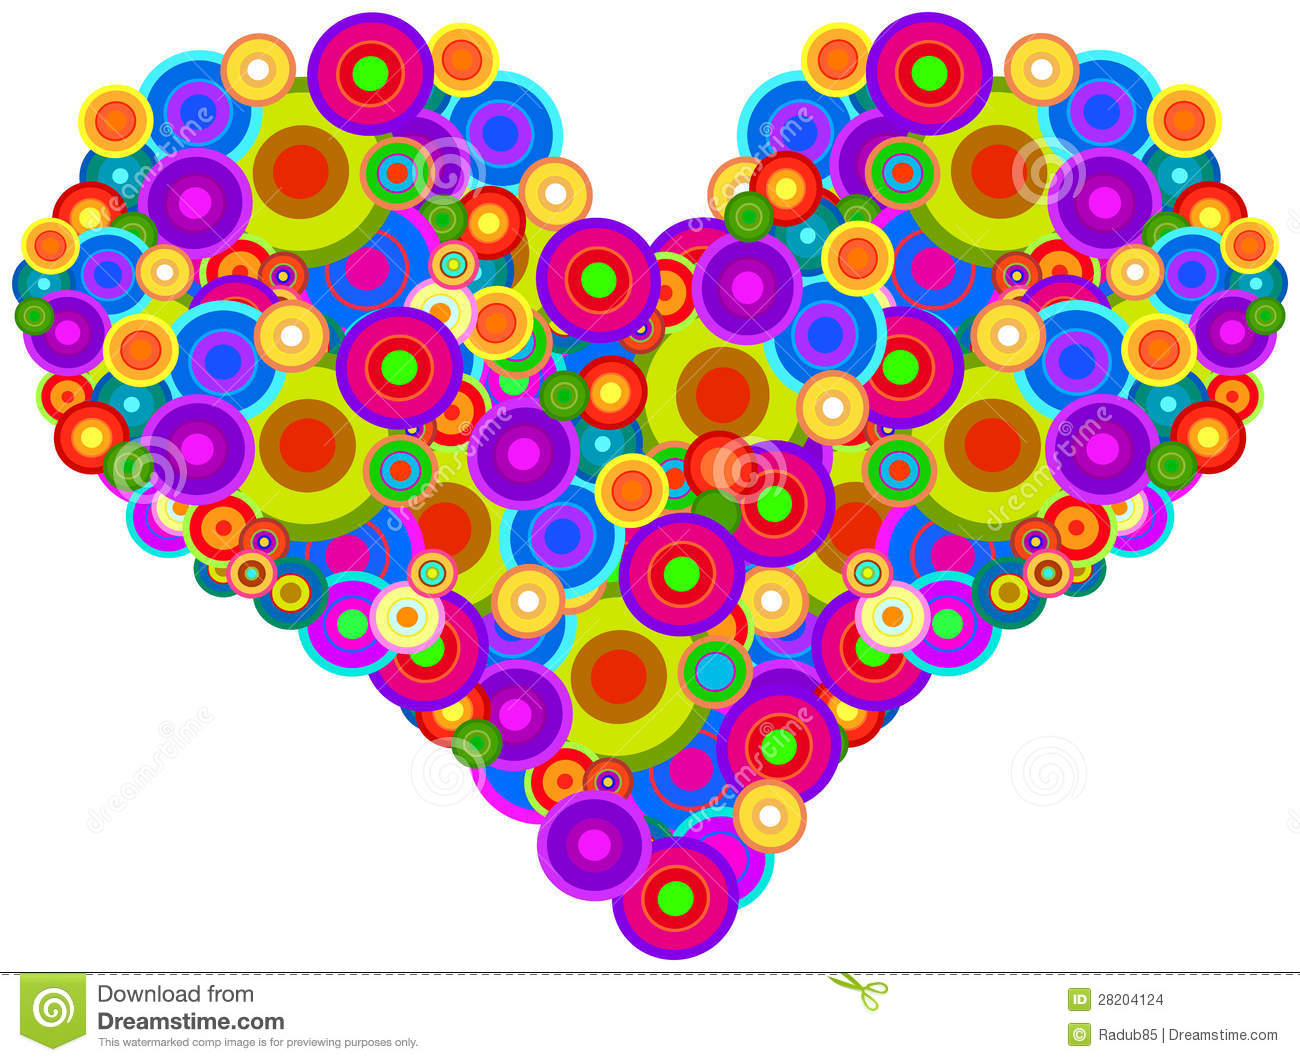 Retro Heart Made Of Multicolored Circles Isolated On White